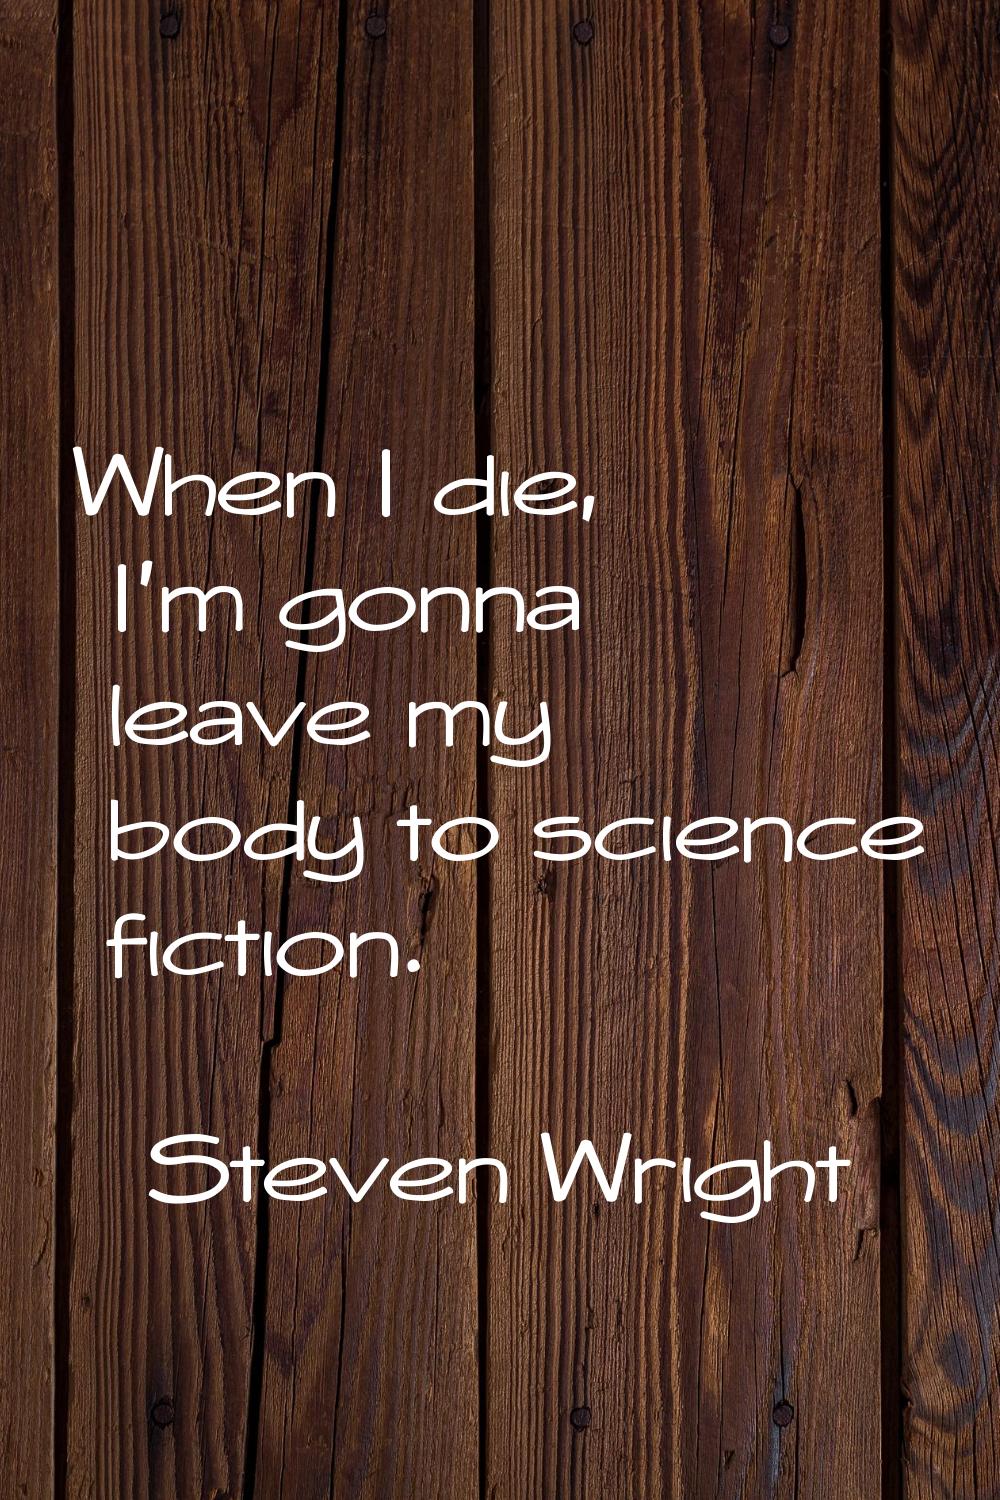 When I die, I'm gonna leave my body to science fiction.